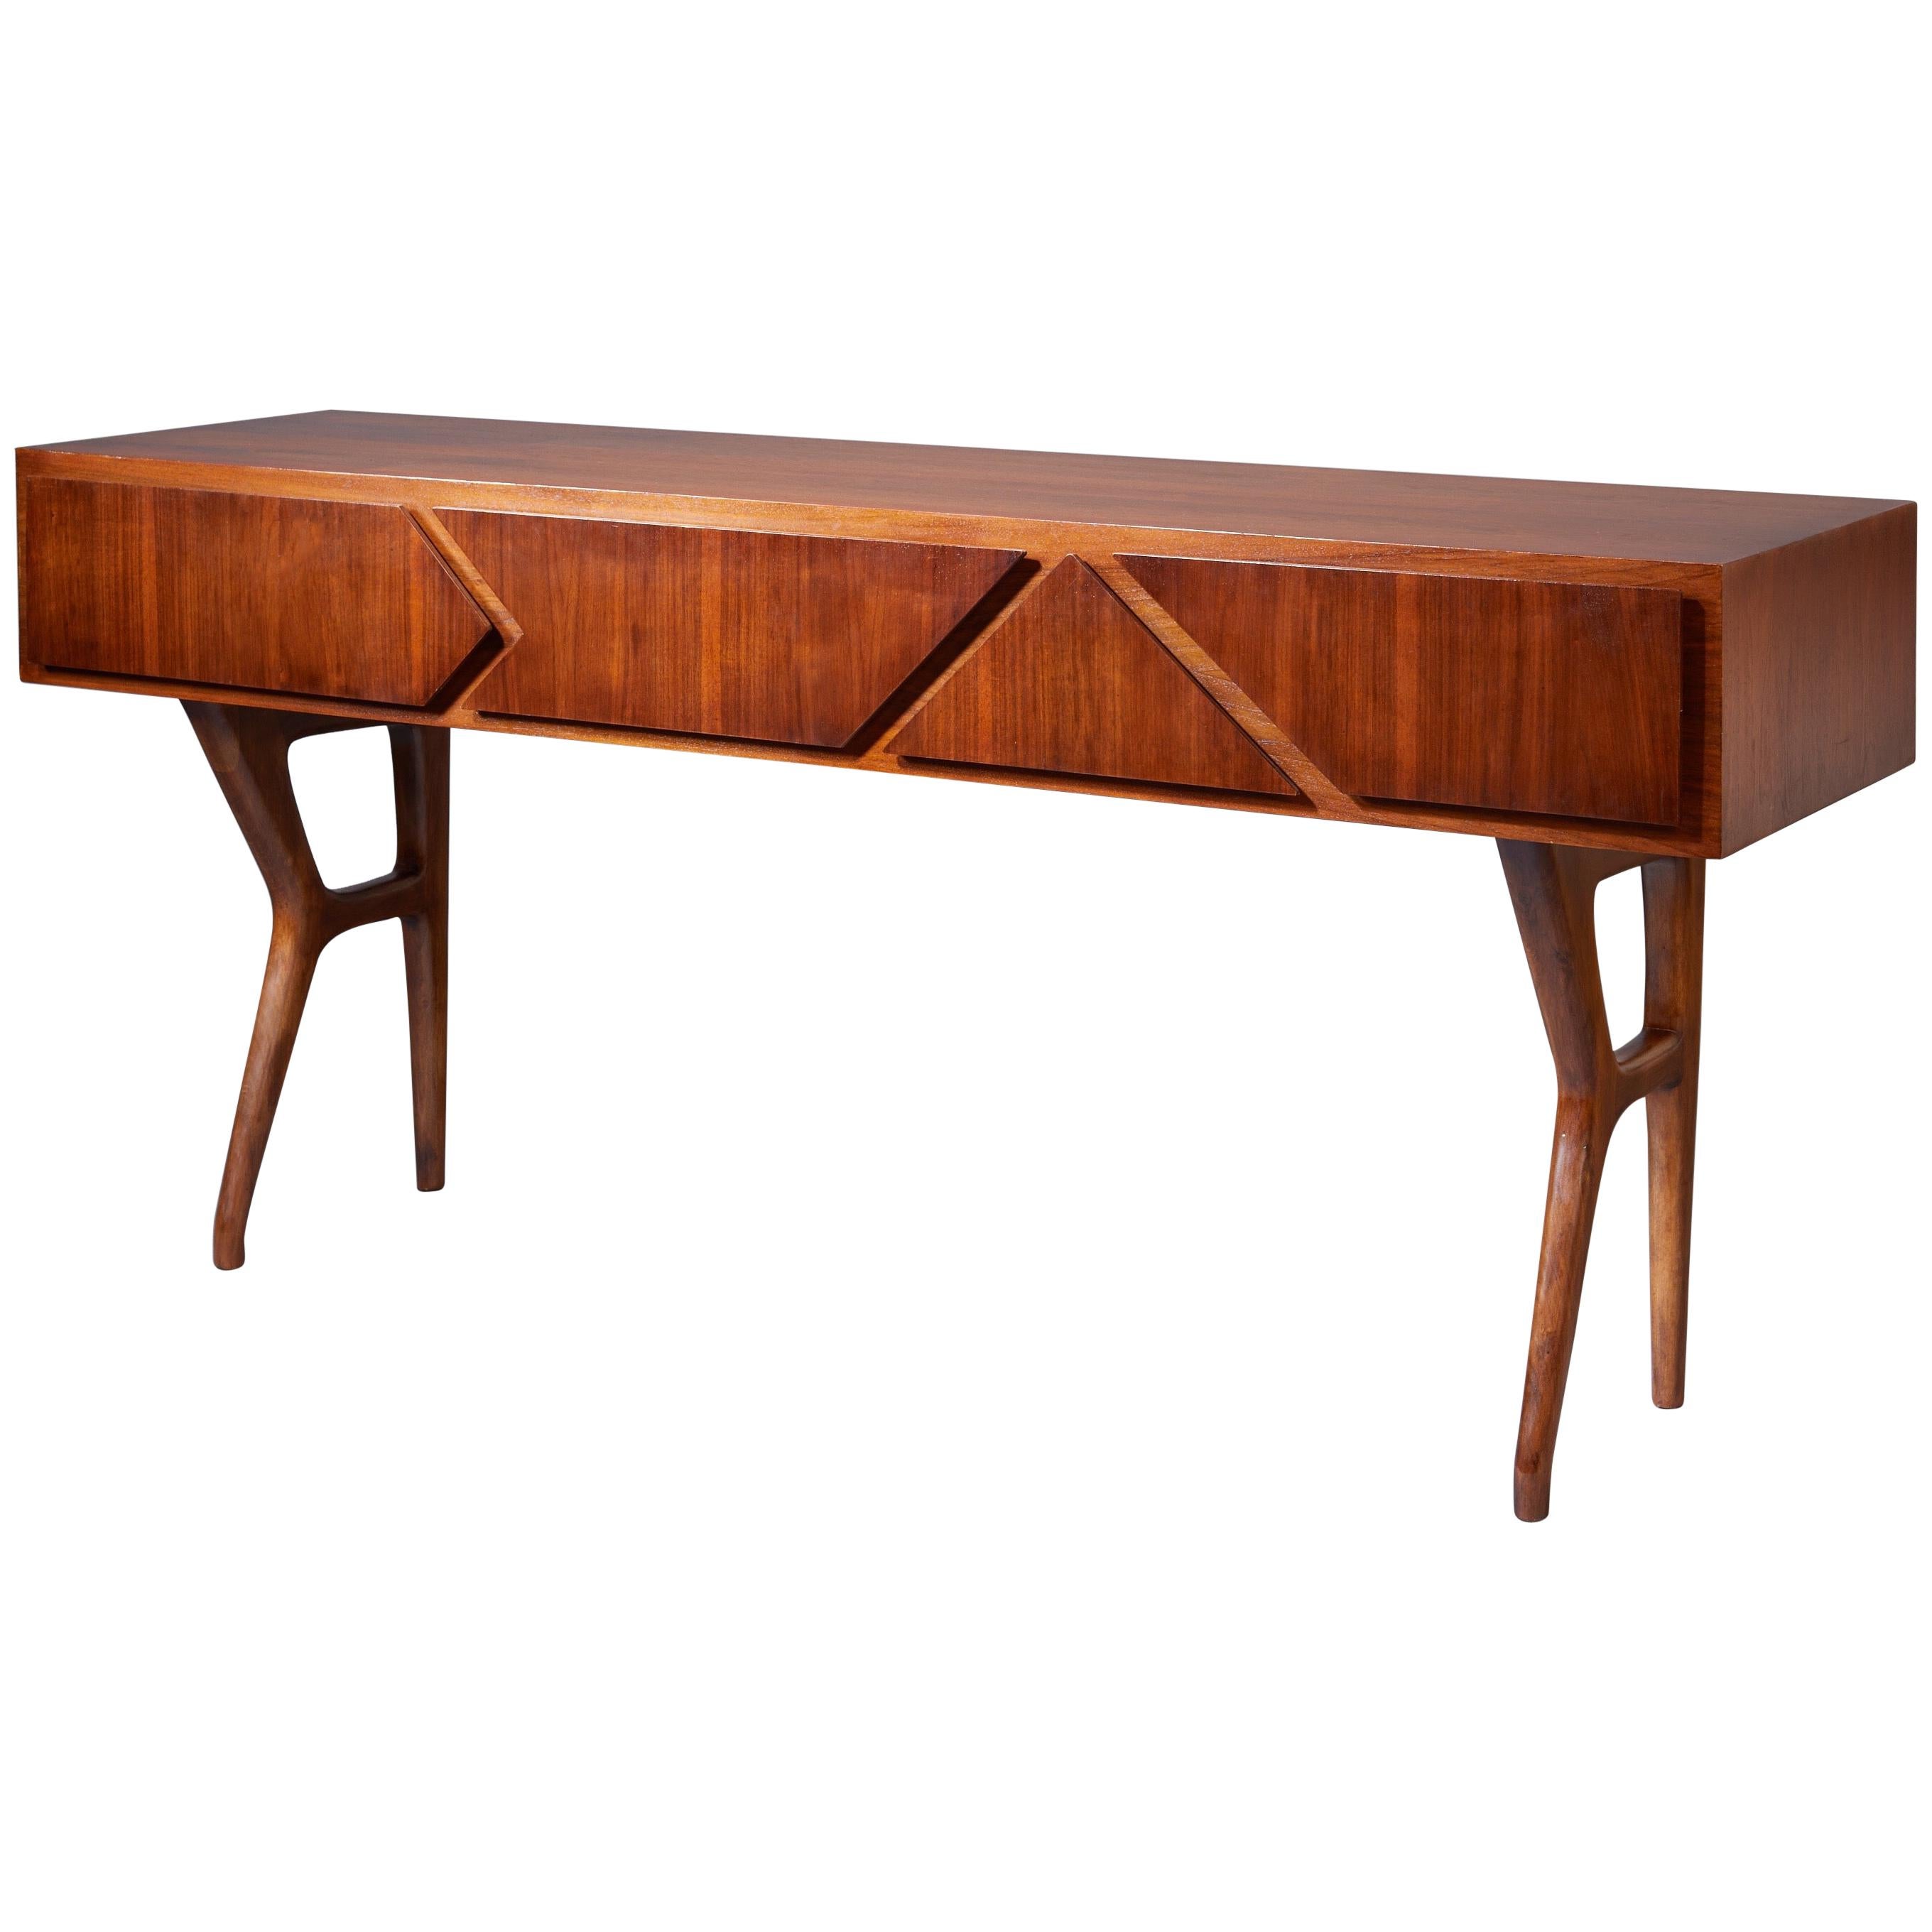 Melchiorre Bega: Important Geometric Four Drawer Console in Walnut, Italy 1950s